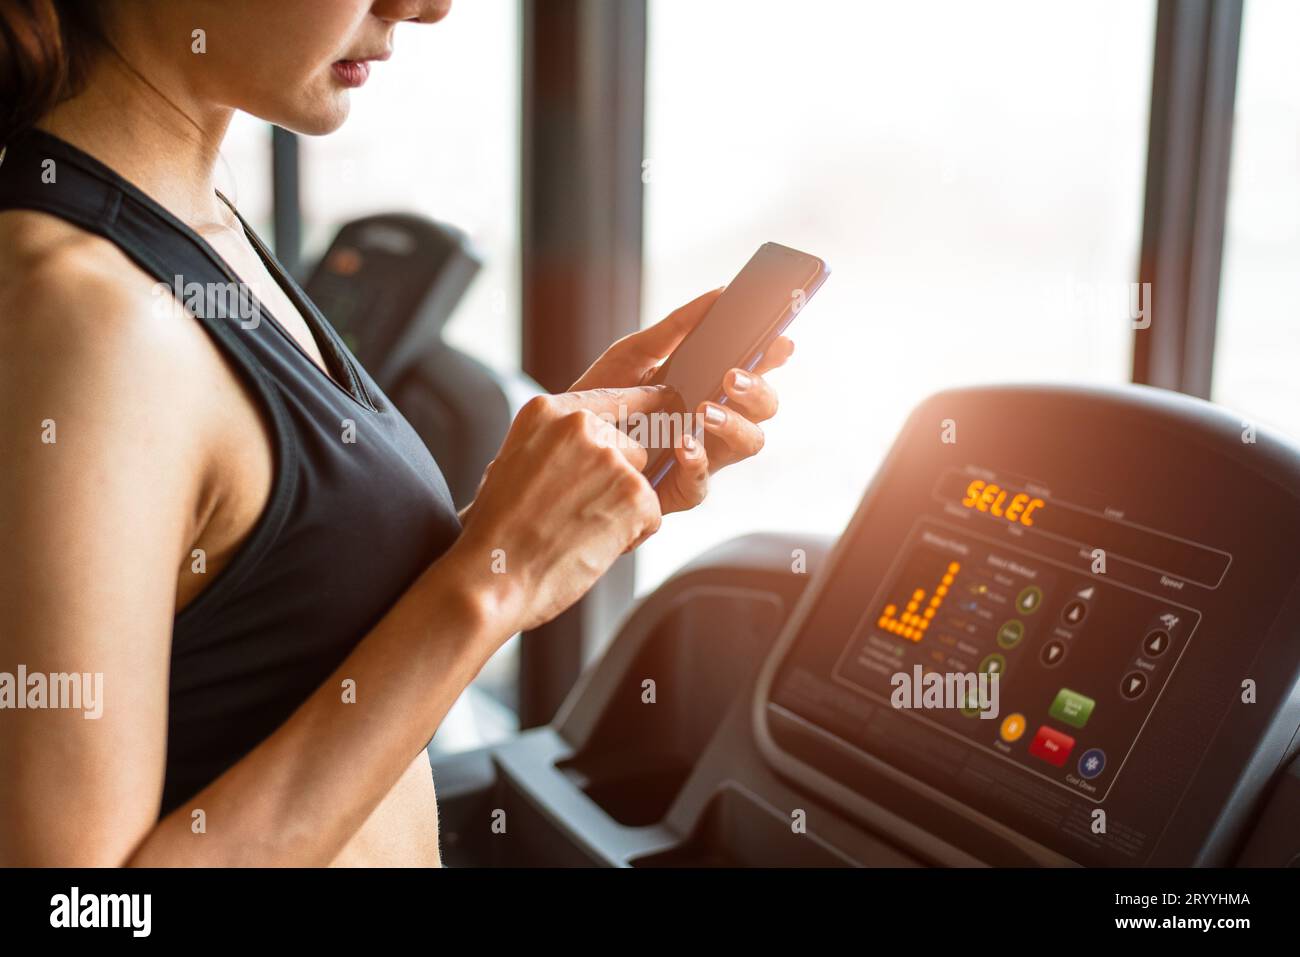 Woman using smart phone when workout or strength training at fitness gym on treadmill. Relax and Technology concept. Sports Exer Stock Photo